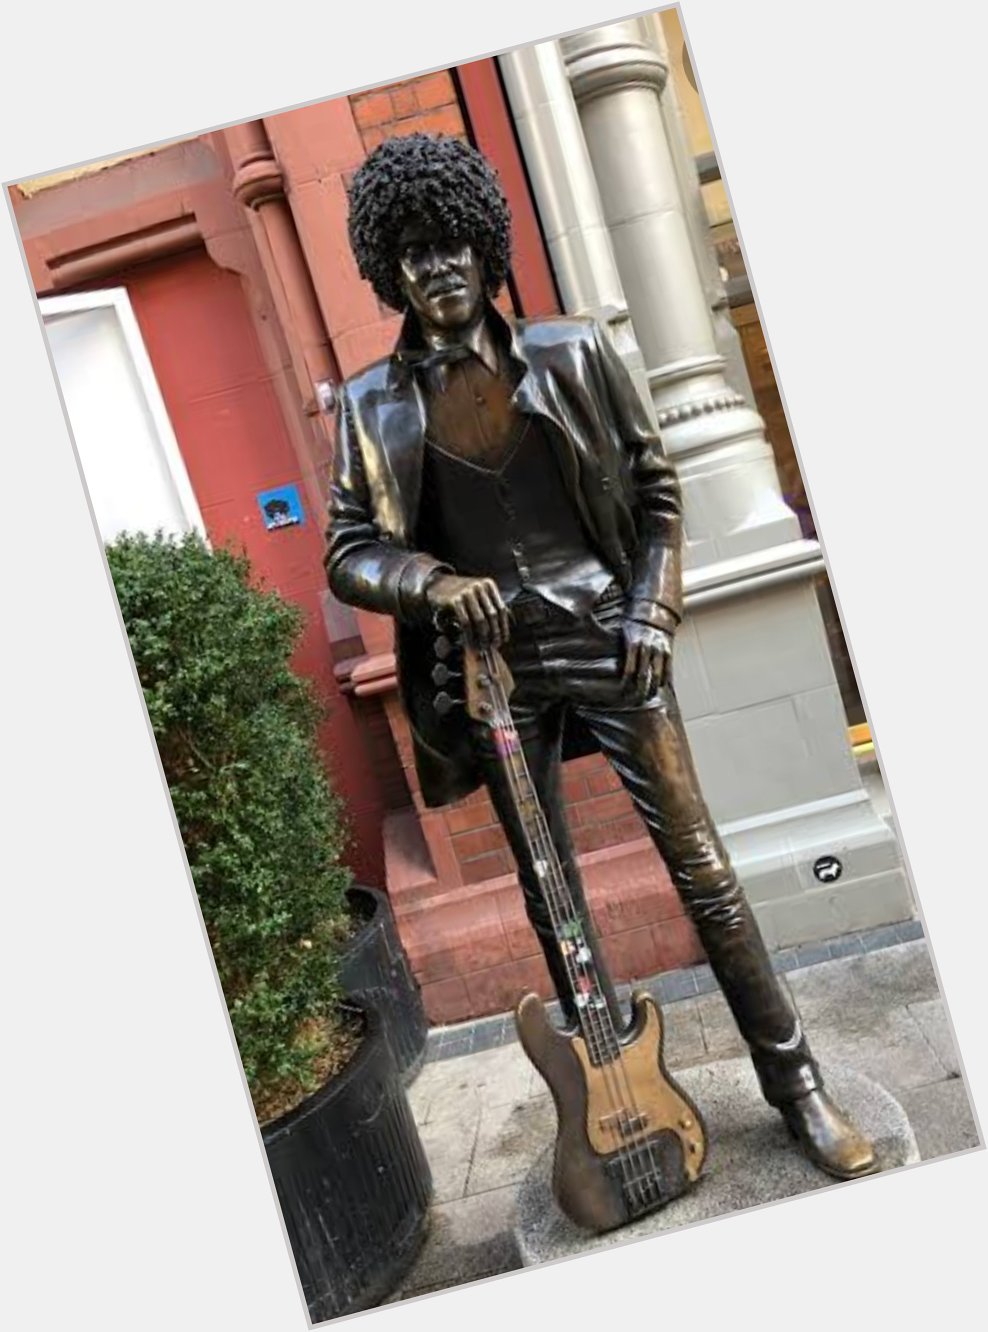 Happy Birthday Phil Lynott boy is back in his home town of Dublin 